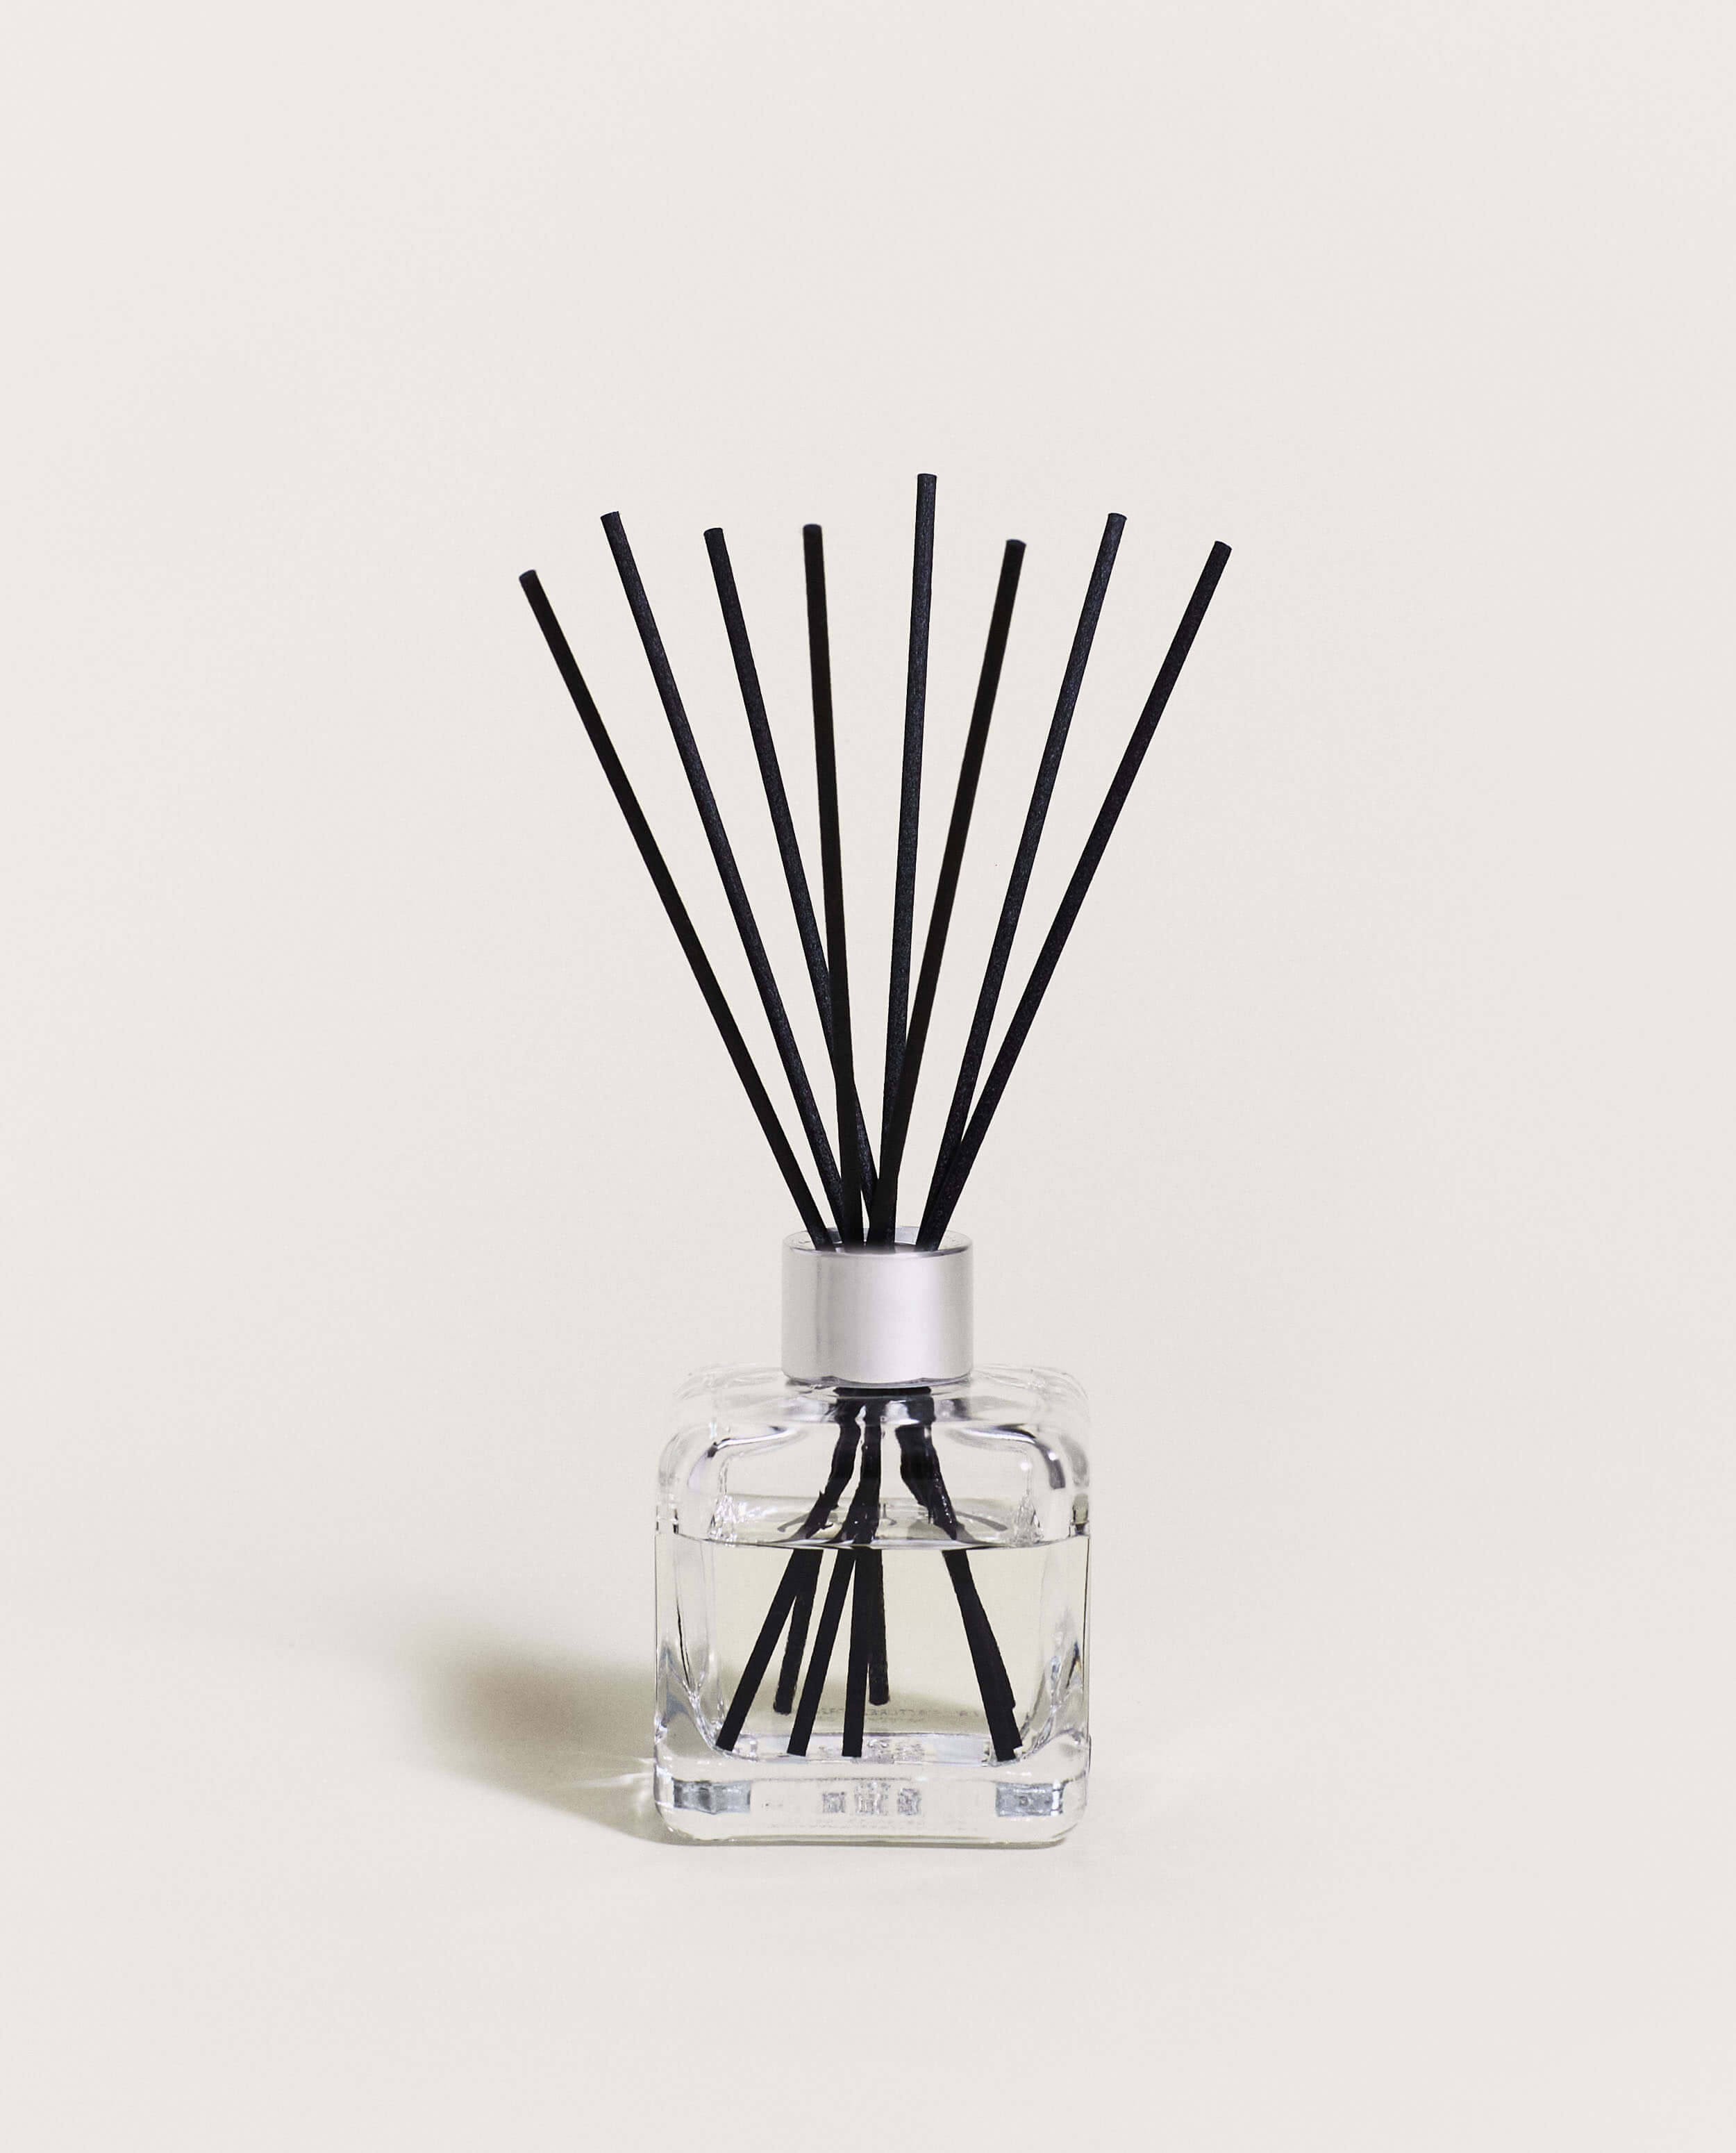 Maison Berger Underneath The Magnolias Scented Bouquet Luxury Reed Diffuser  from Sheffield department store, Atkinsons.